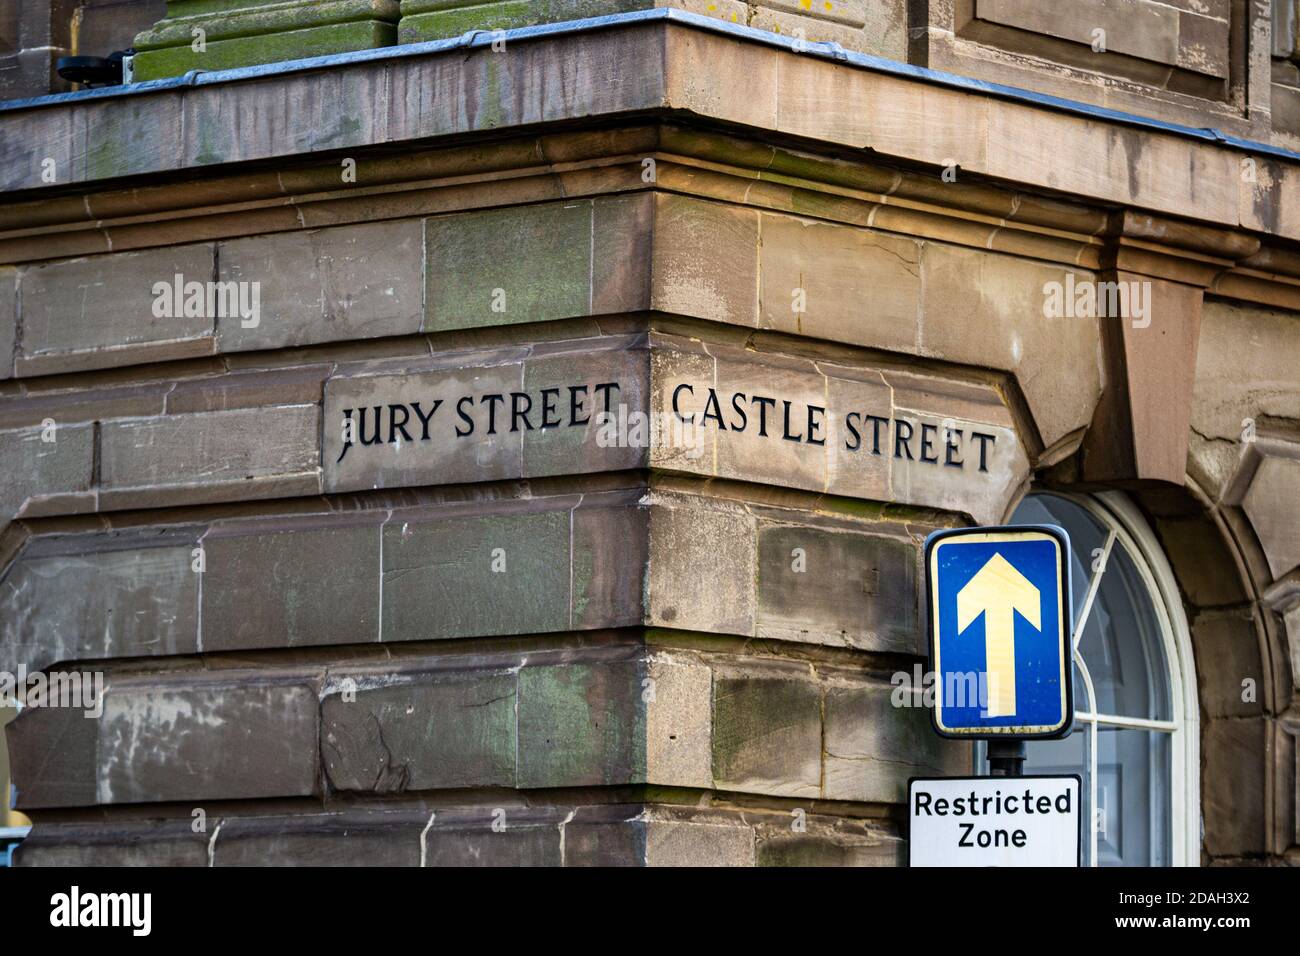 Corner of Jury Street and Castle Street in Warwick. Roads signs carved into stone brickwork Stock Photo